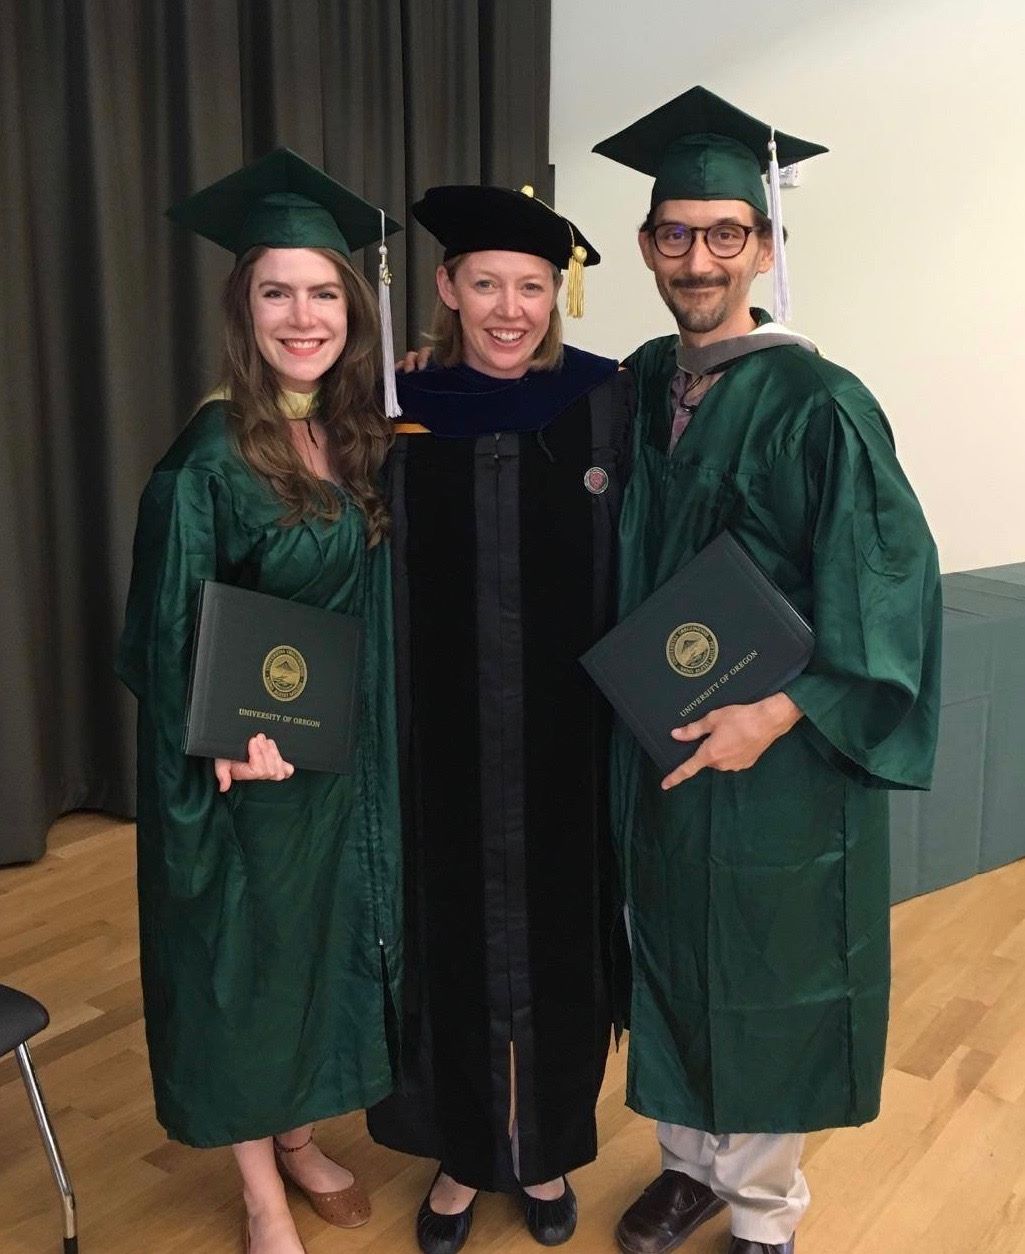 LTS Students Katie Carpenter (left) and Christopher Daradics (right) with CASLS Director Dr. Julie Sykes